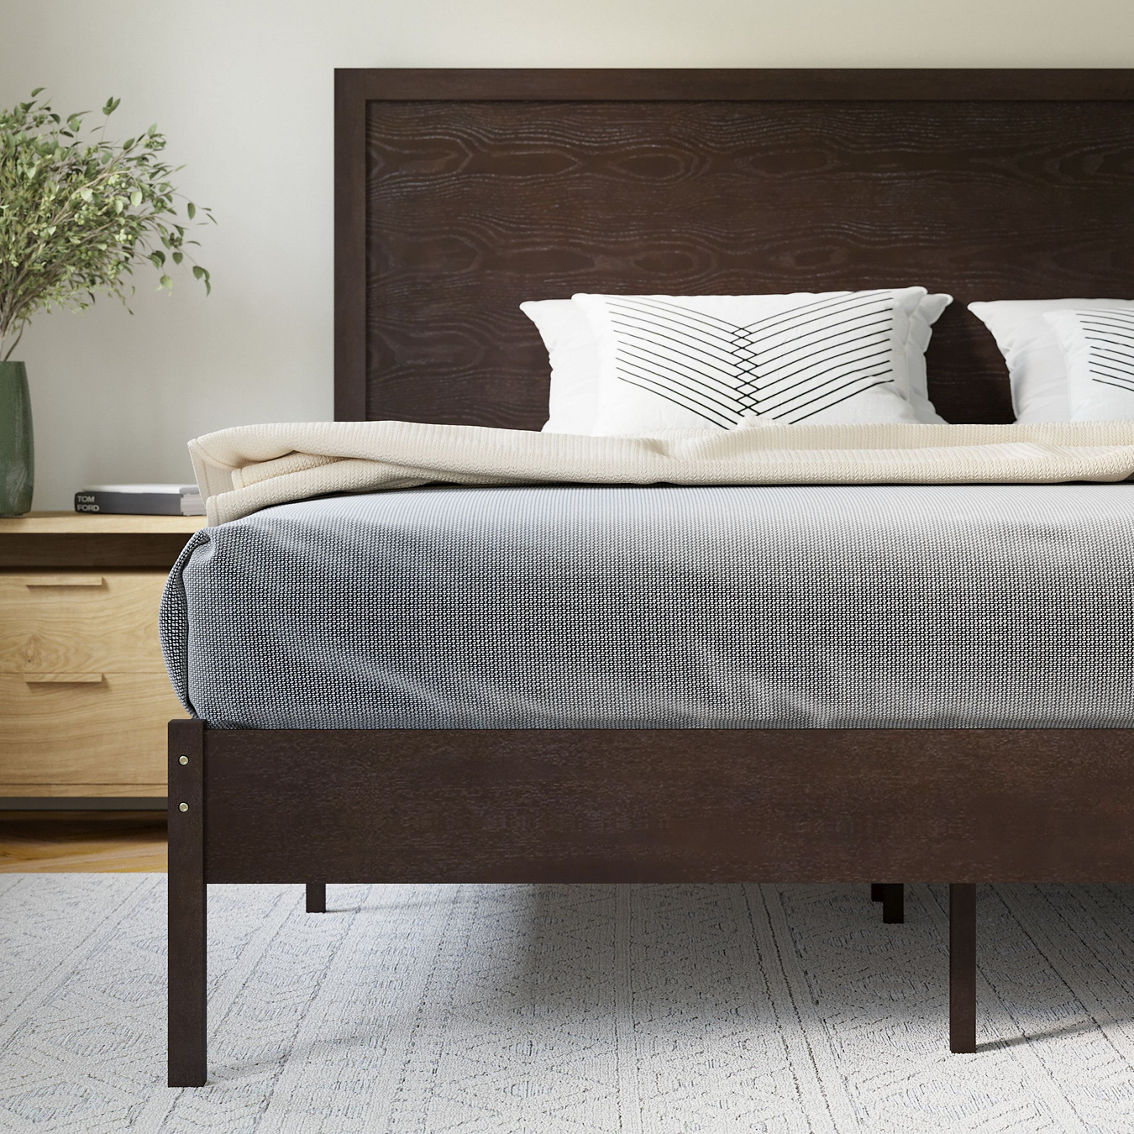 Flash Furniture Wooden Platform Bed with Headboard - Image 2 of 5